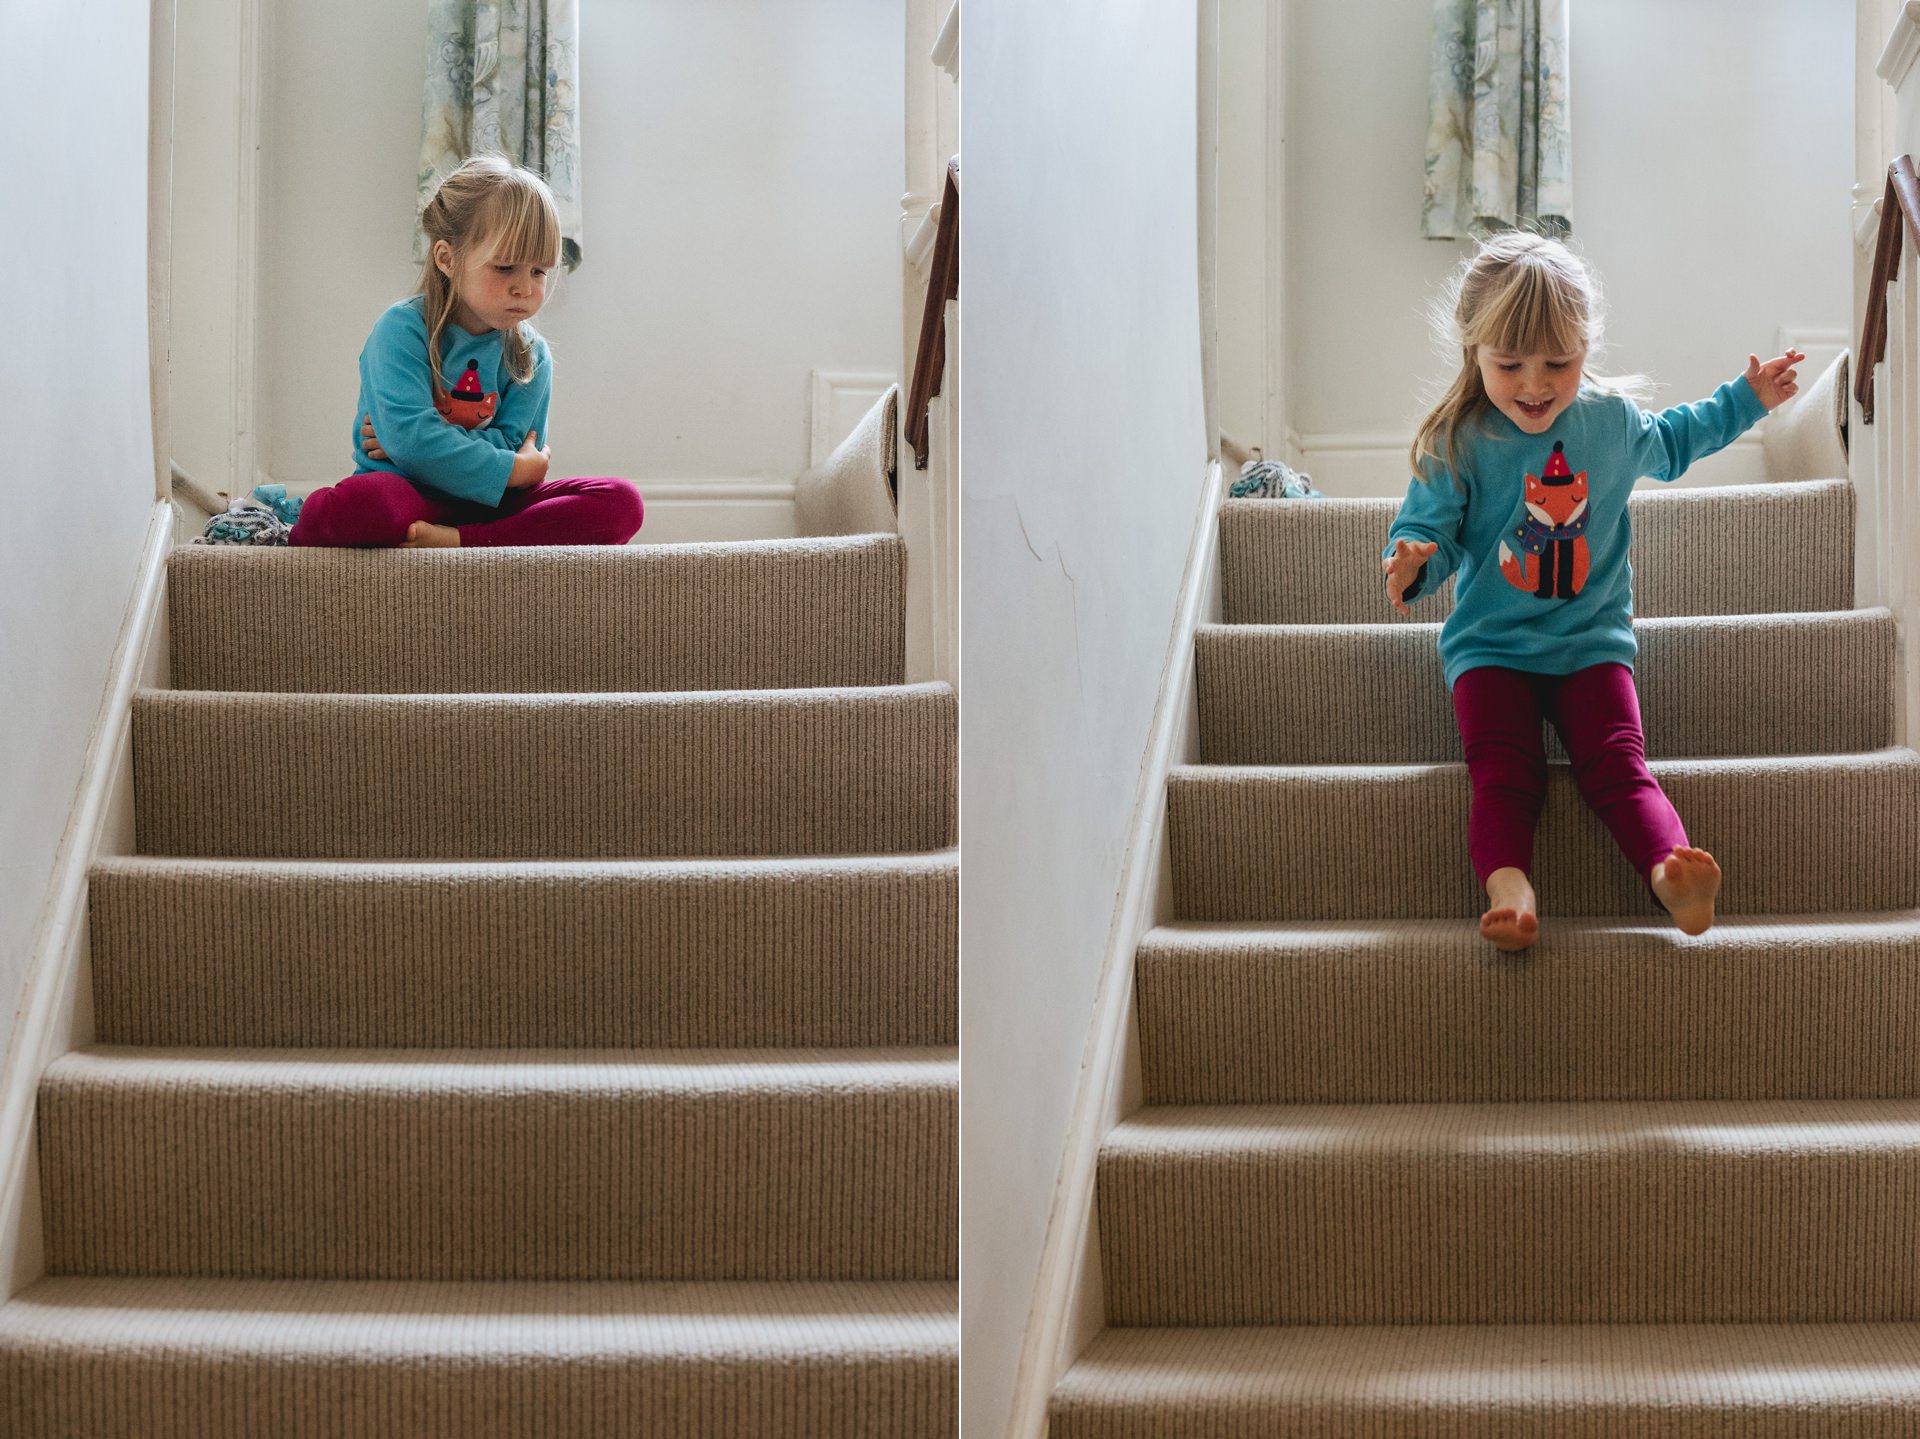 A young girl bouncing down a staircase at home